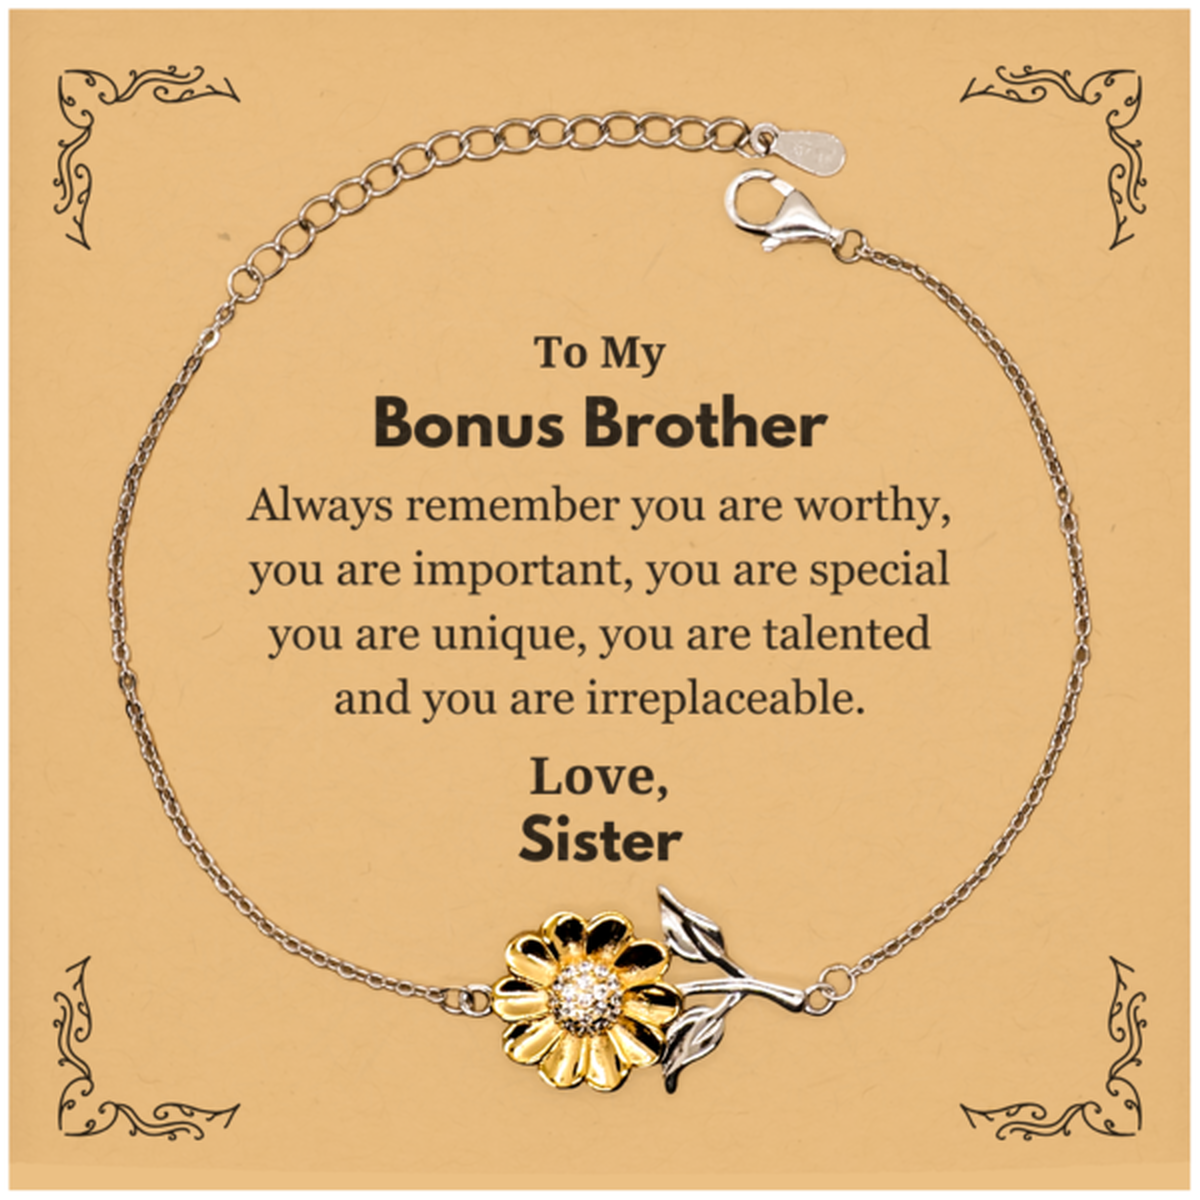 Bonus Brother Birthday Gifts from Sister, Inspirational Sunflower Bracelet for Bonus Brother Christmas Graduation Gifts for Bonus Brother Always remember you are worthy, you are important. Love, Sister